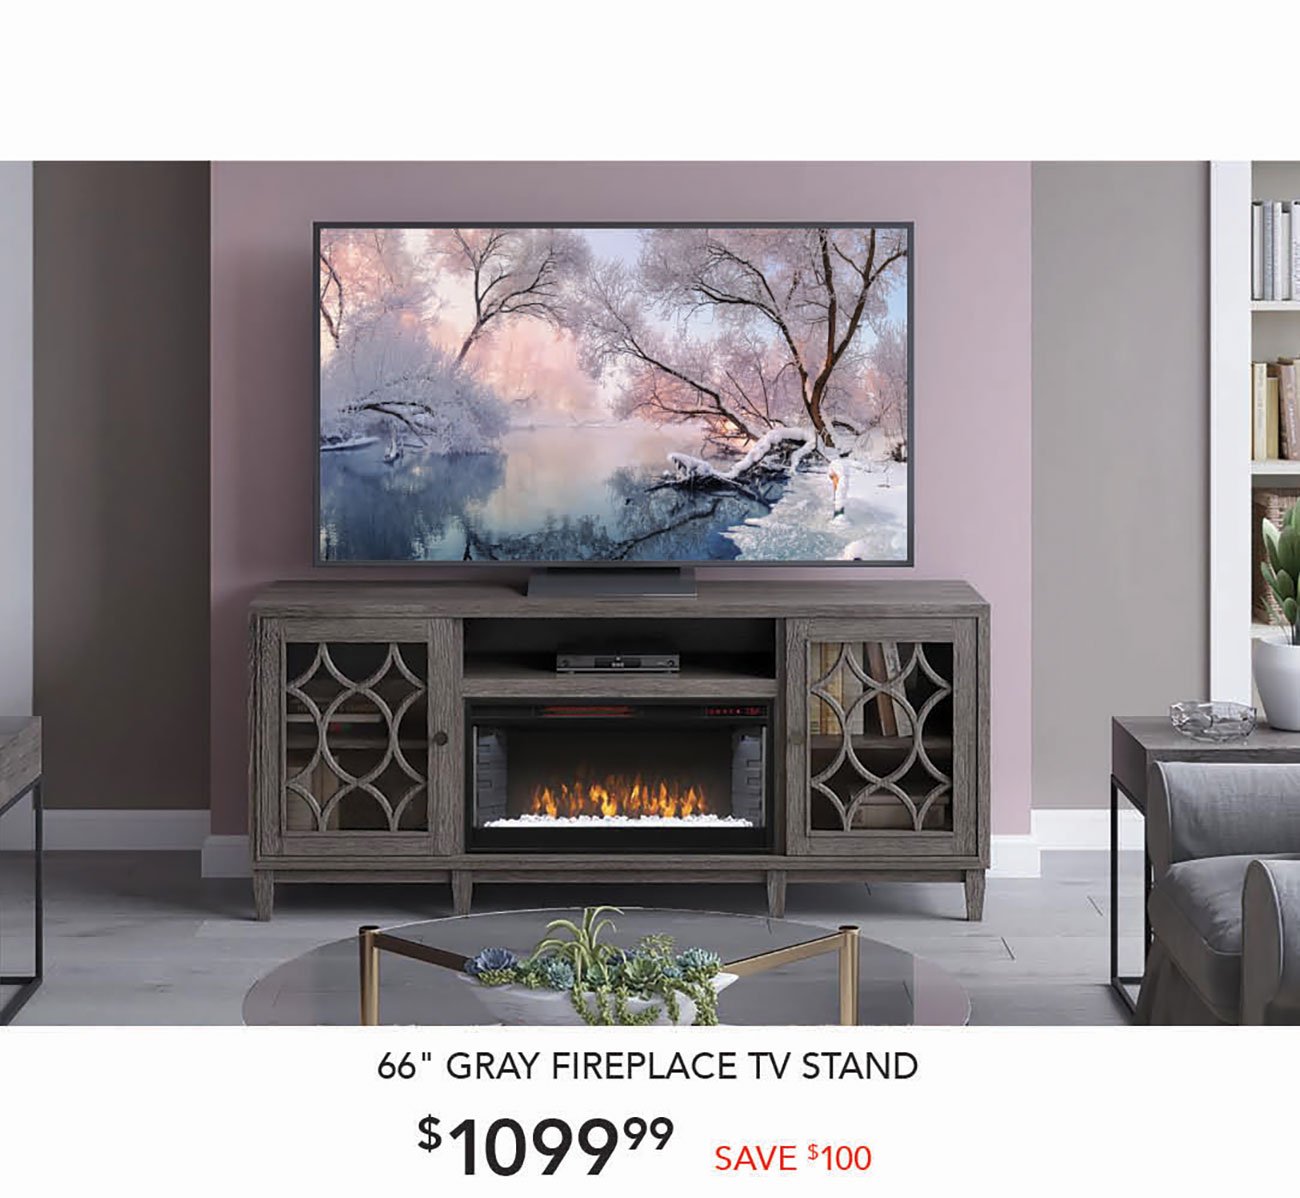 Gray-Fireplace-TV-Stand